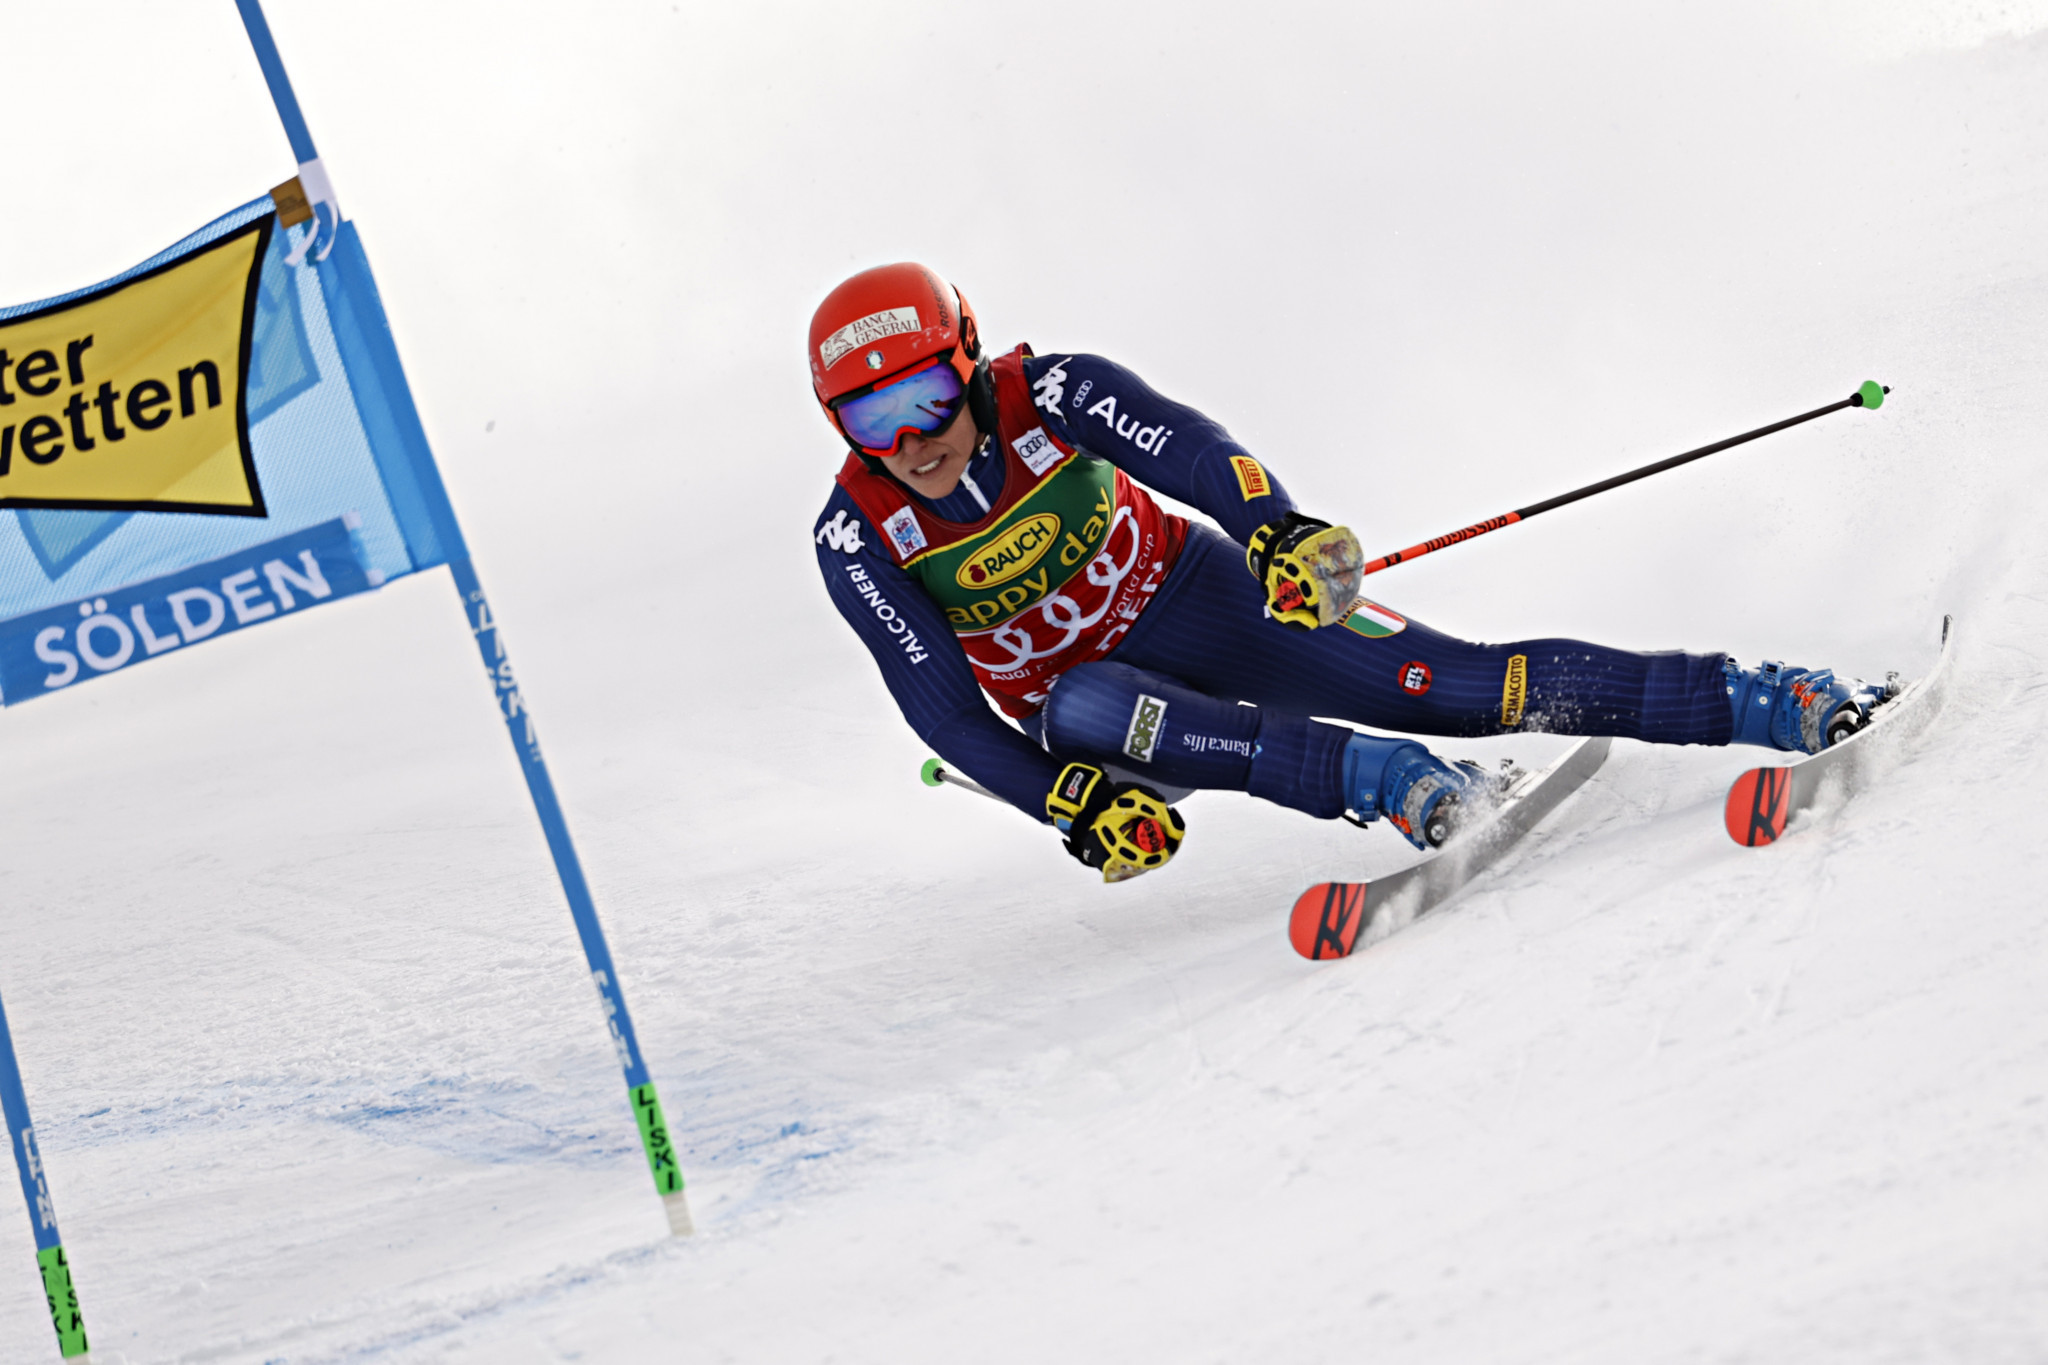 Federica Brignone of Italy was the runner-up at the FIS Alpine Ski World Cup event in Sölden ©Getty Images